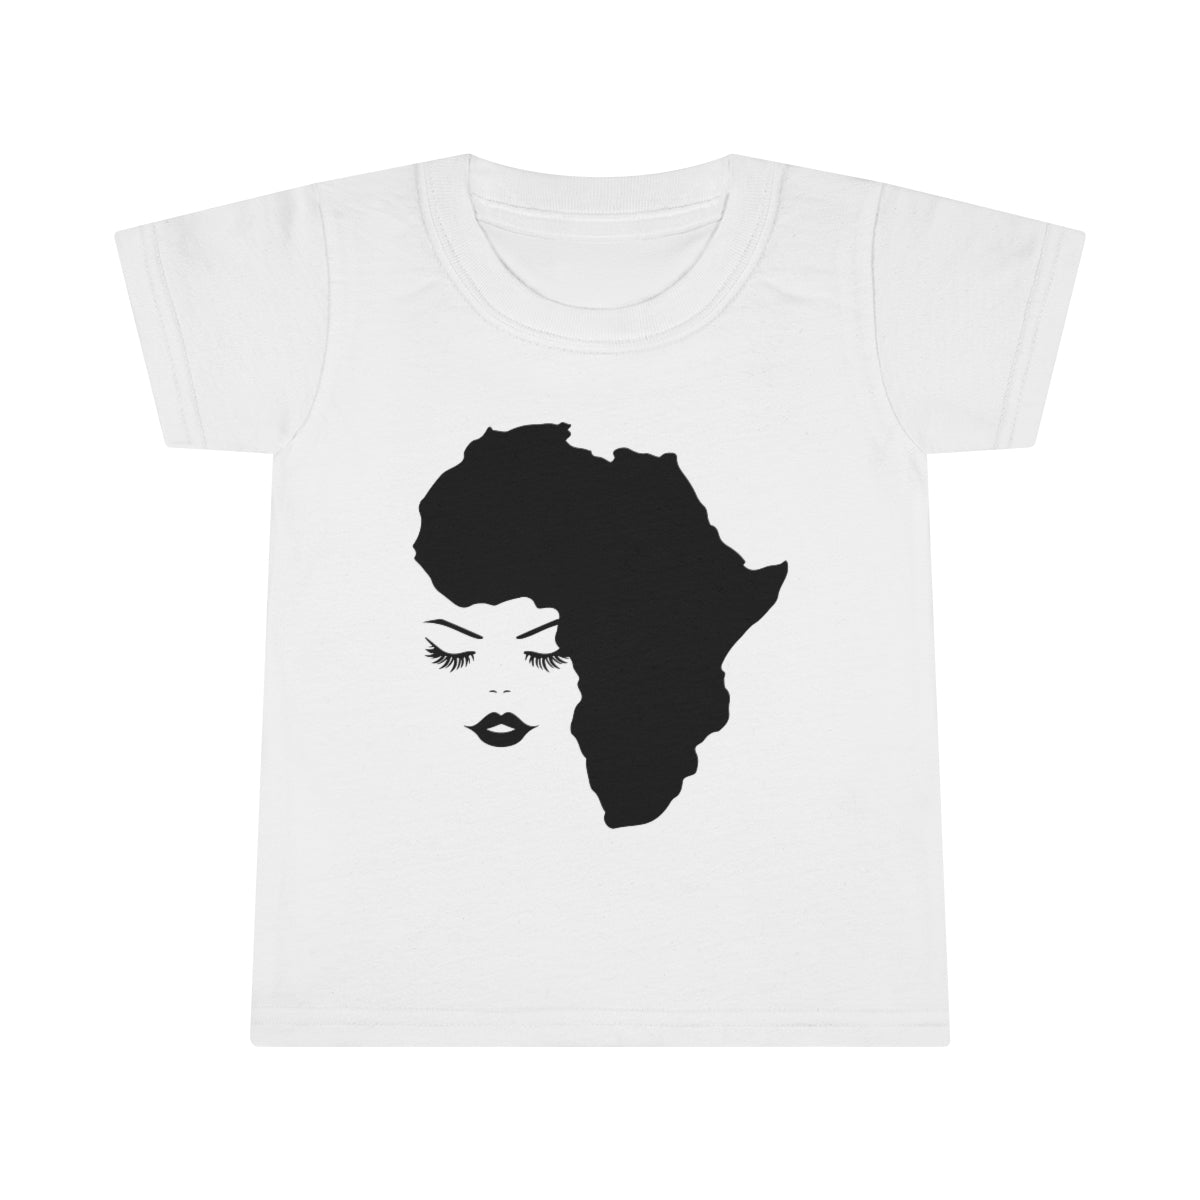 Lady Africa Toddler T-shirt